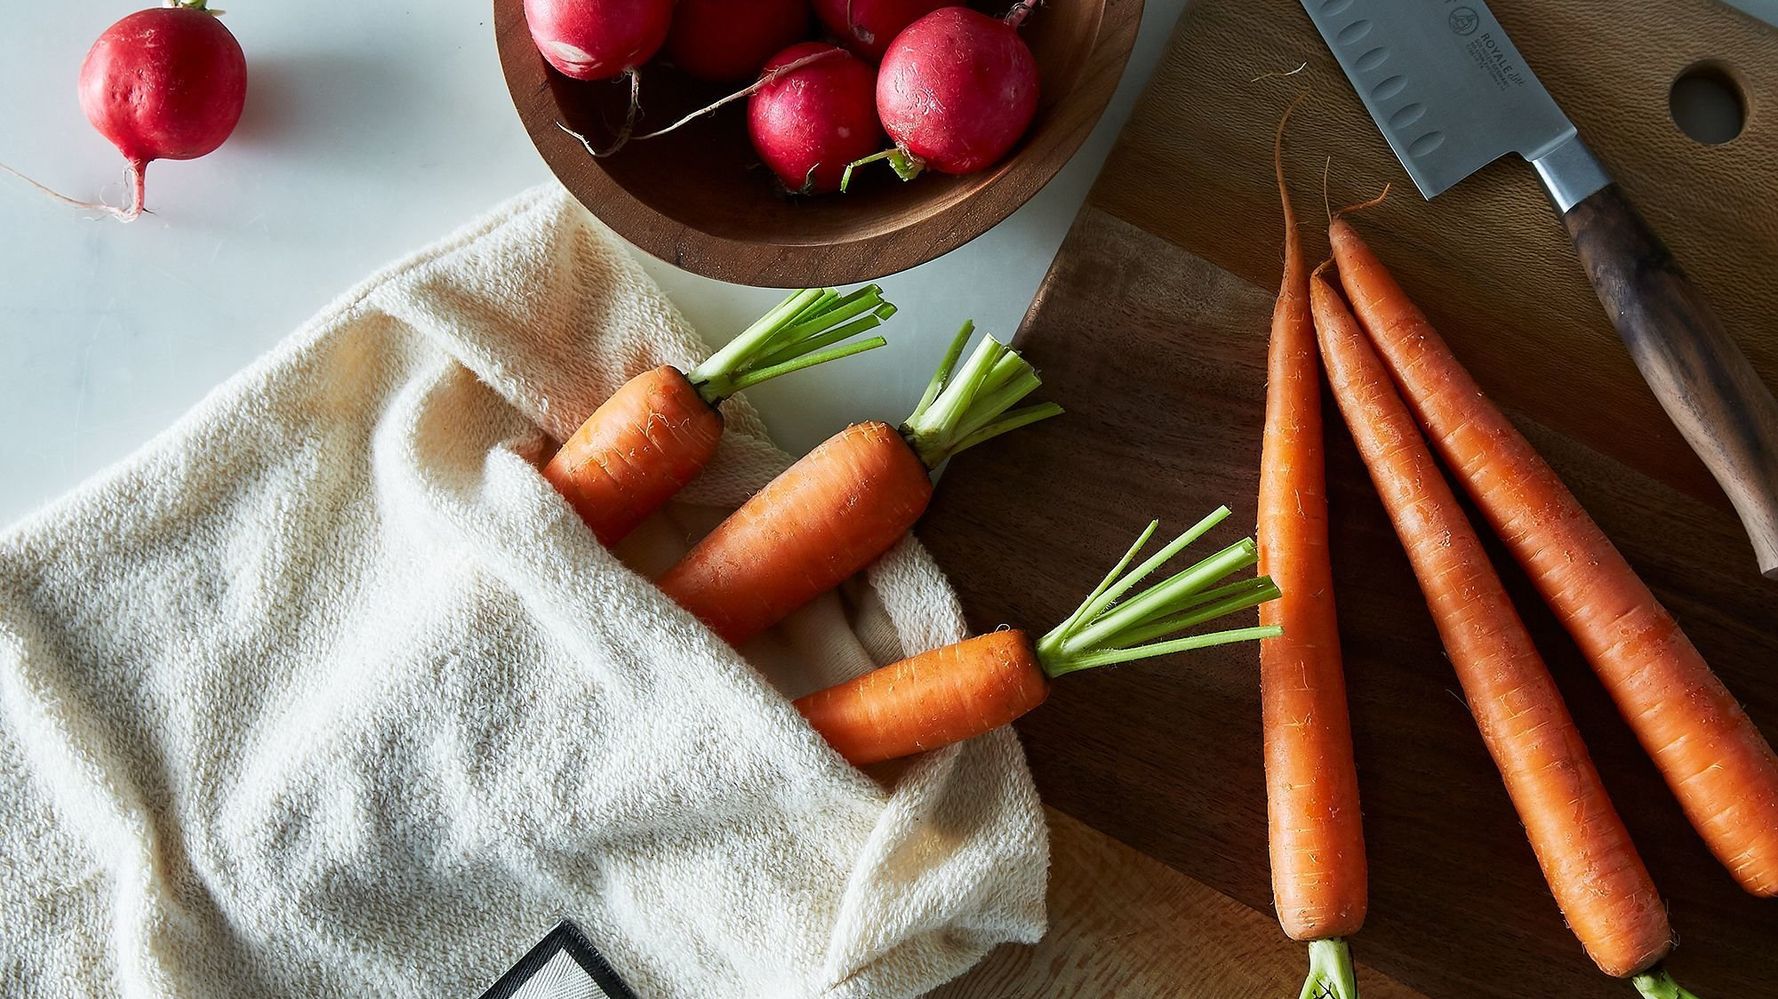 17 Items to Effortlessly Display Fresh Produce in Your Home